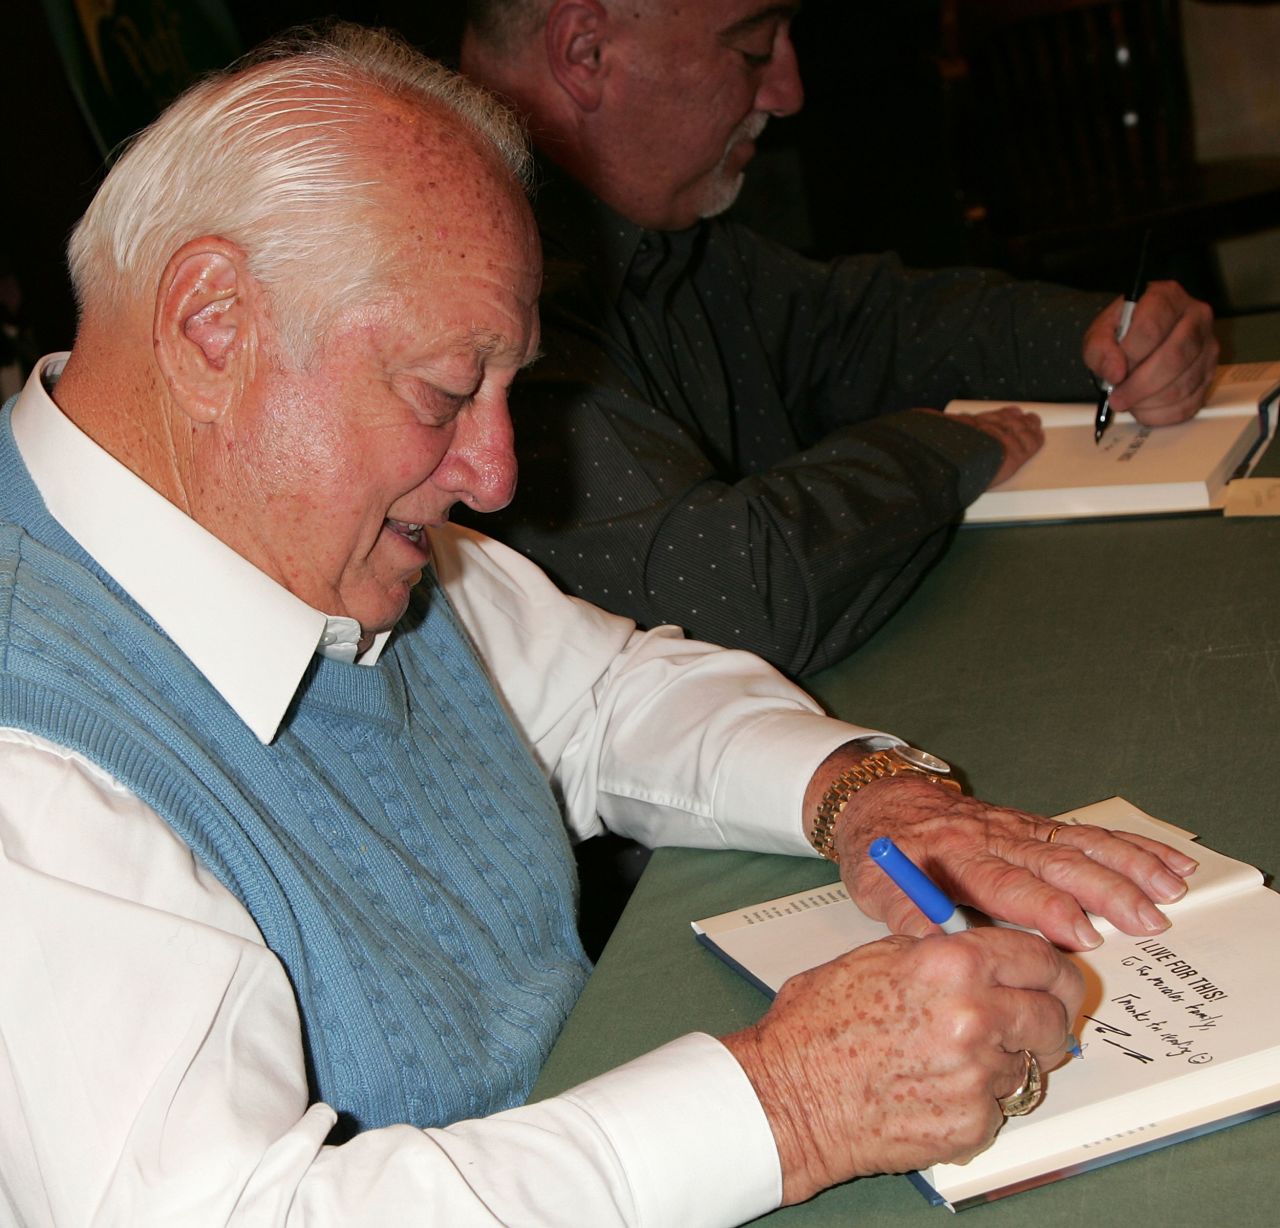 Lasorda, pictured here in November 2007, signs his book "I Live For This!: Baseball's Last True Believer" at a Barnes & Noble in Los Angeles.